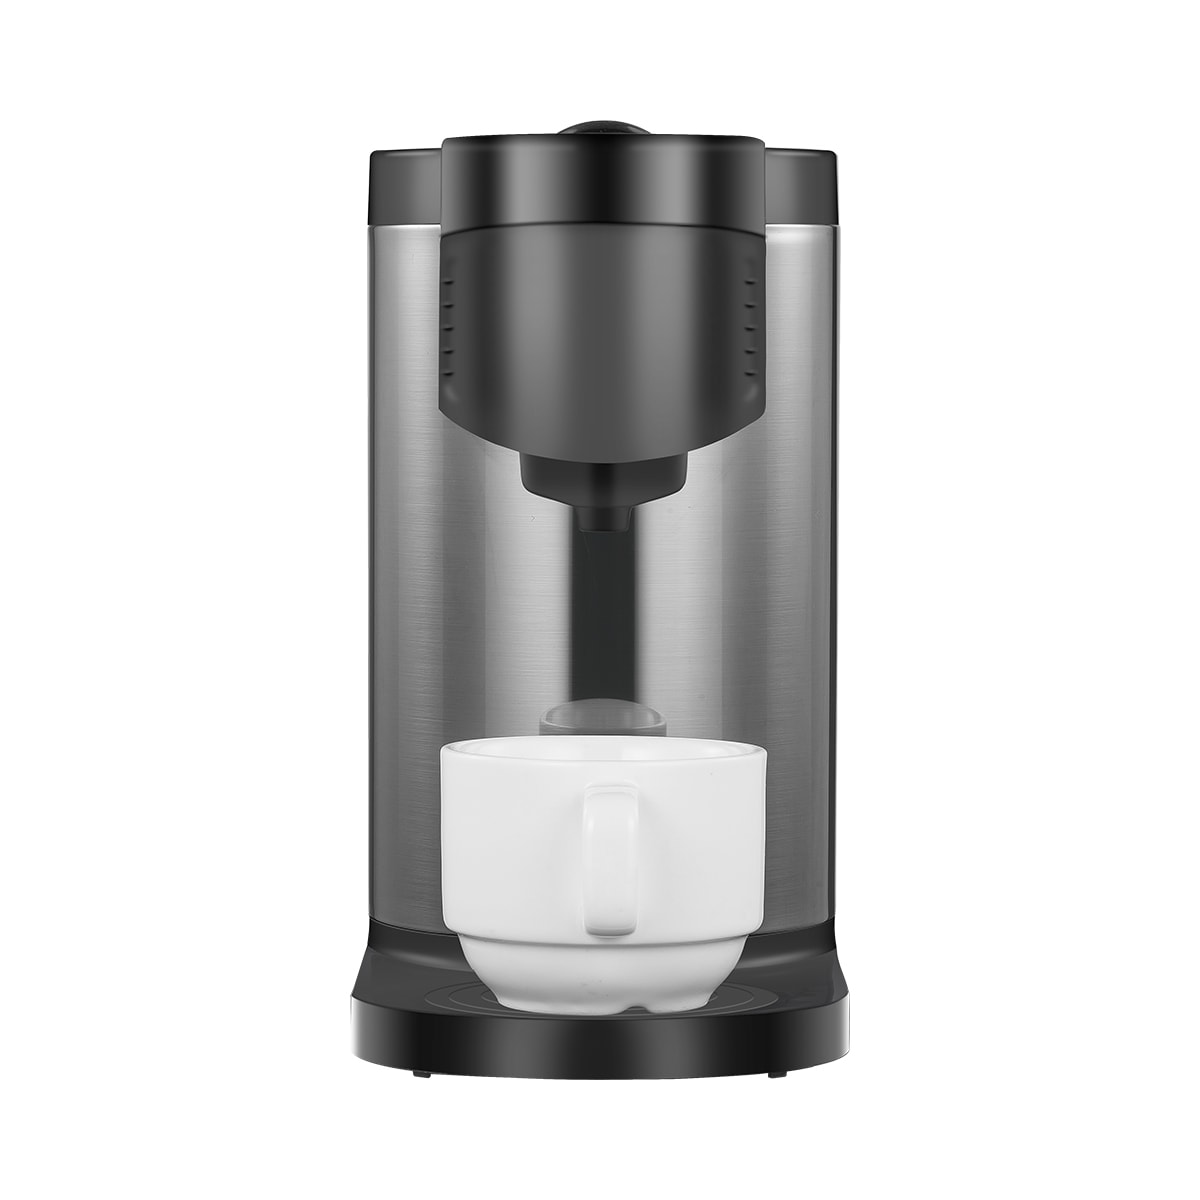 Highland Black+Stainless Steel Single-Serve Coffee Maker at Lowes.com